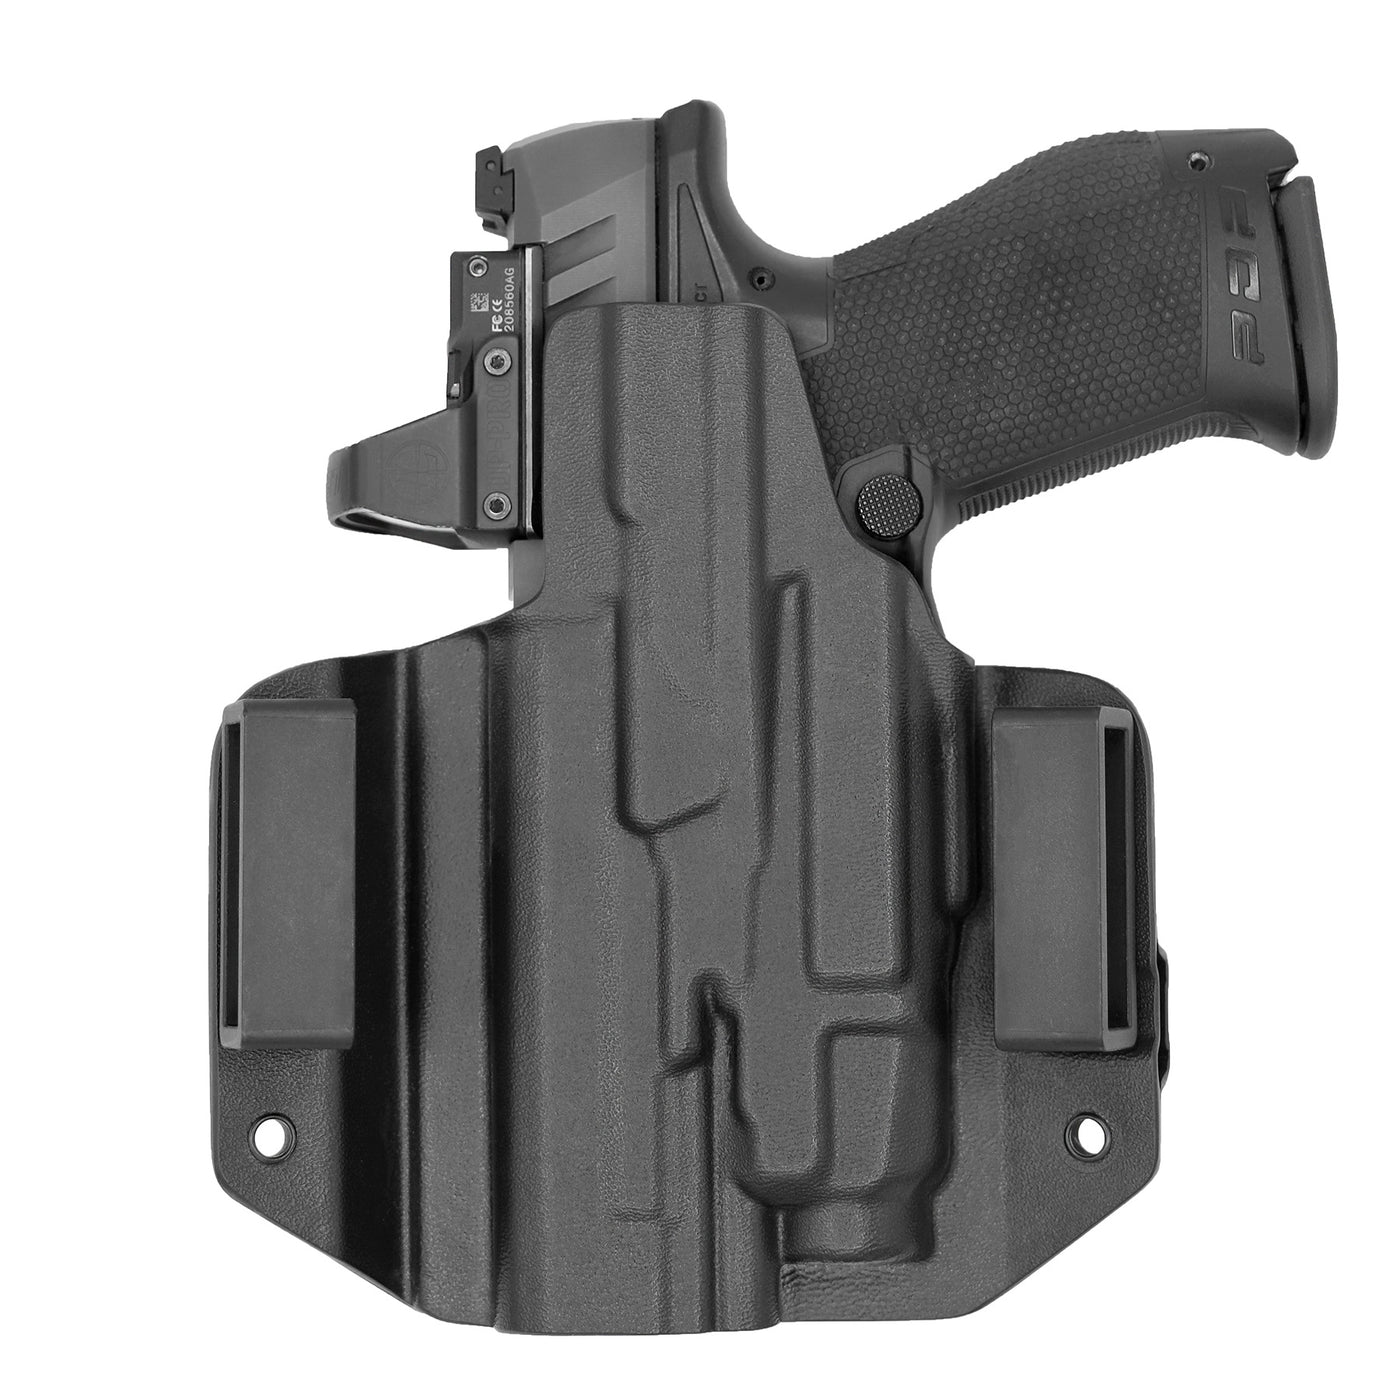 C&G Holsters Quickship OWB Tactical M&P 9/40 Streamlight TLR7/A in holstered position back view